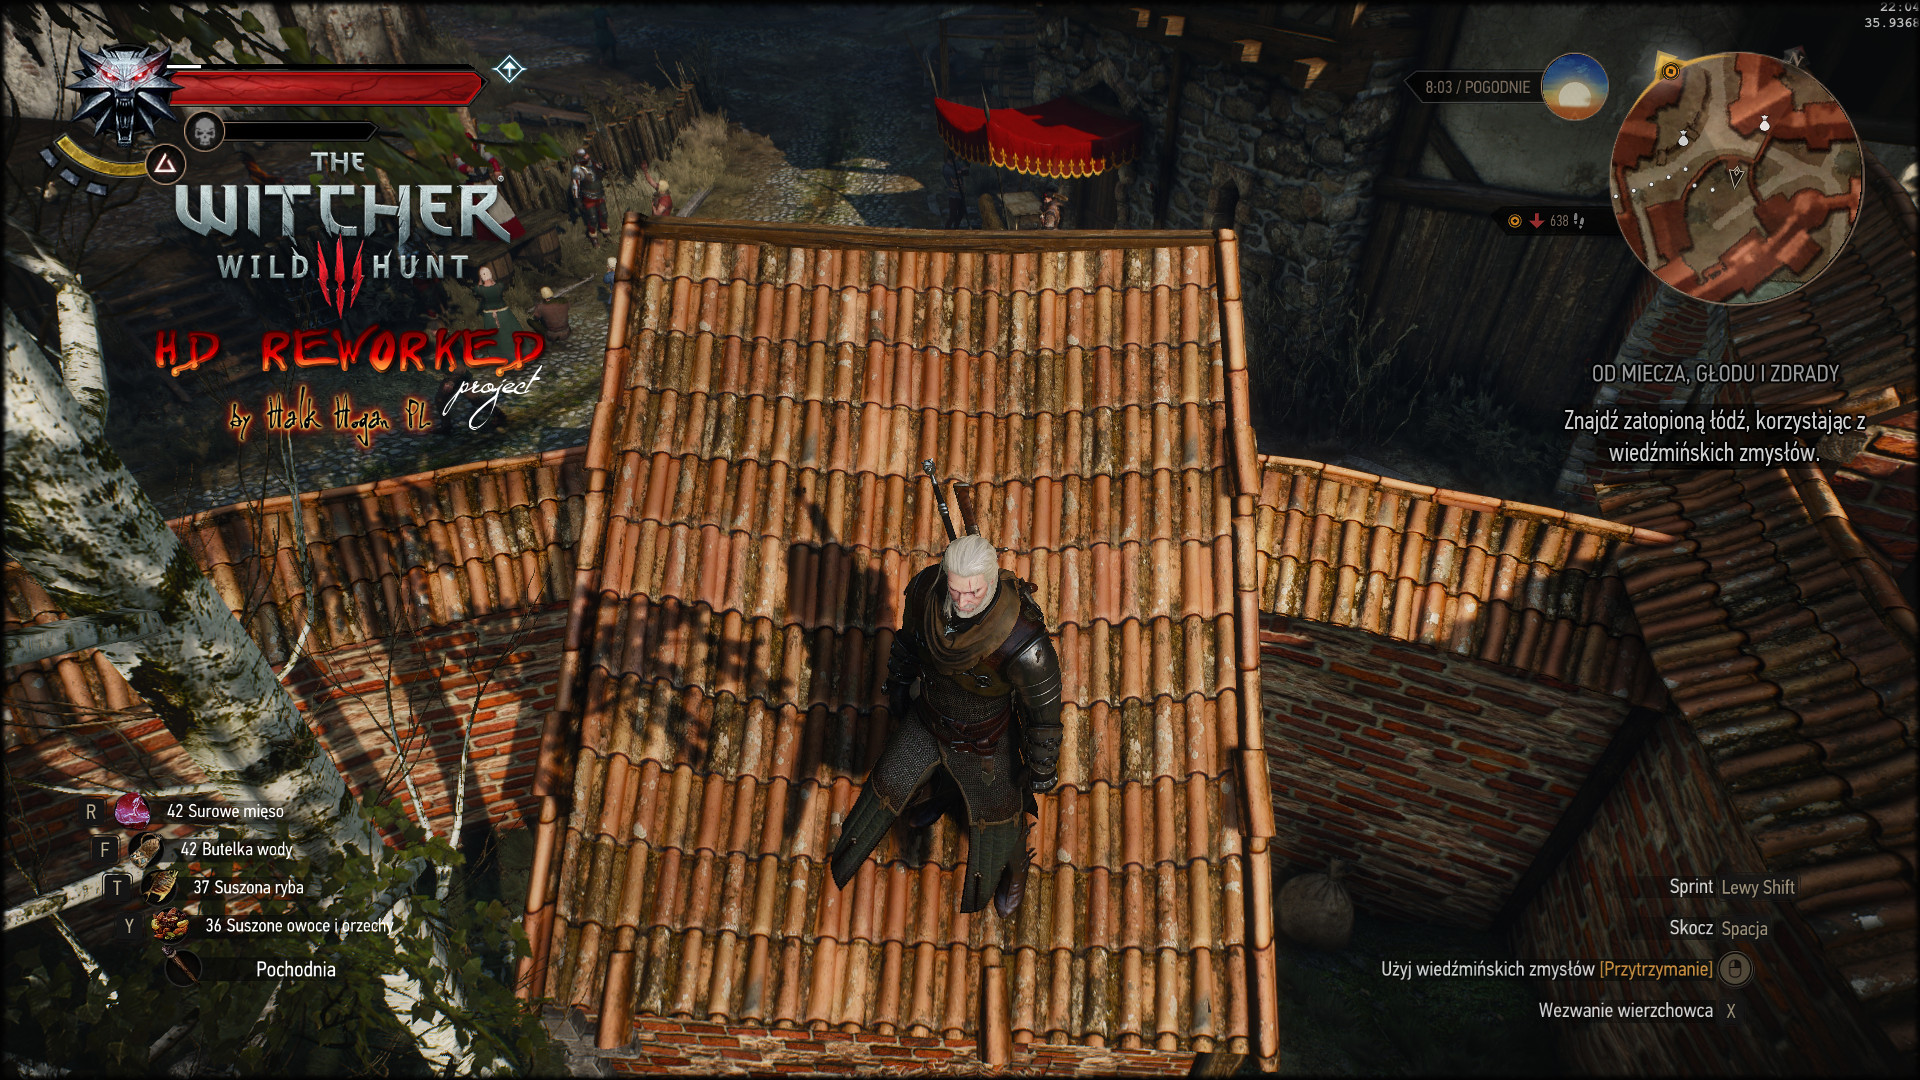 THE WITCHER 1 - Ultra Modded Graphics / HD textures and models (+ mod list)  